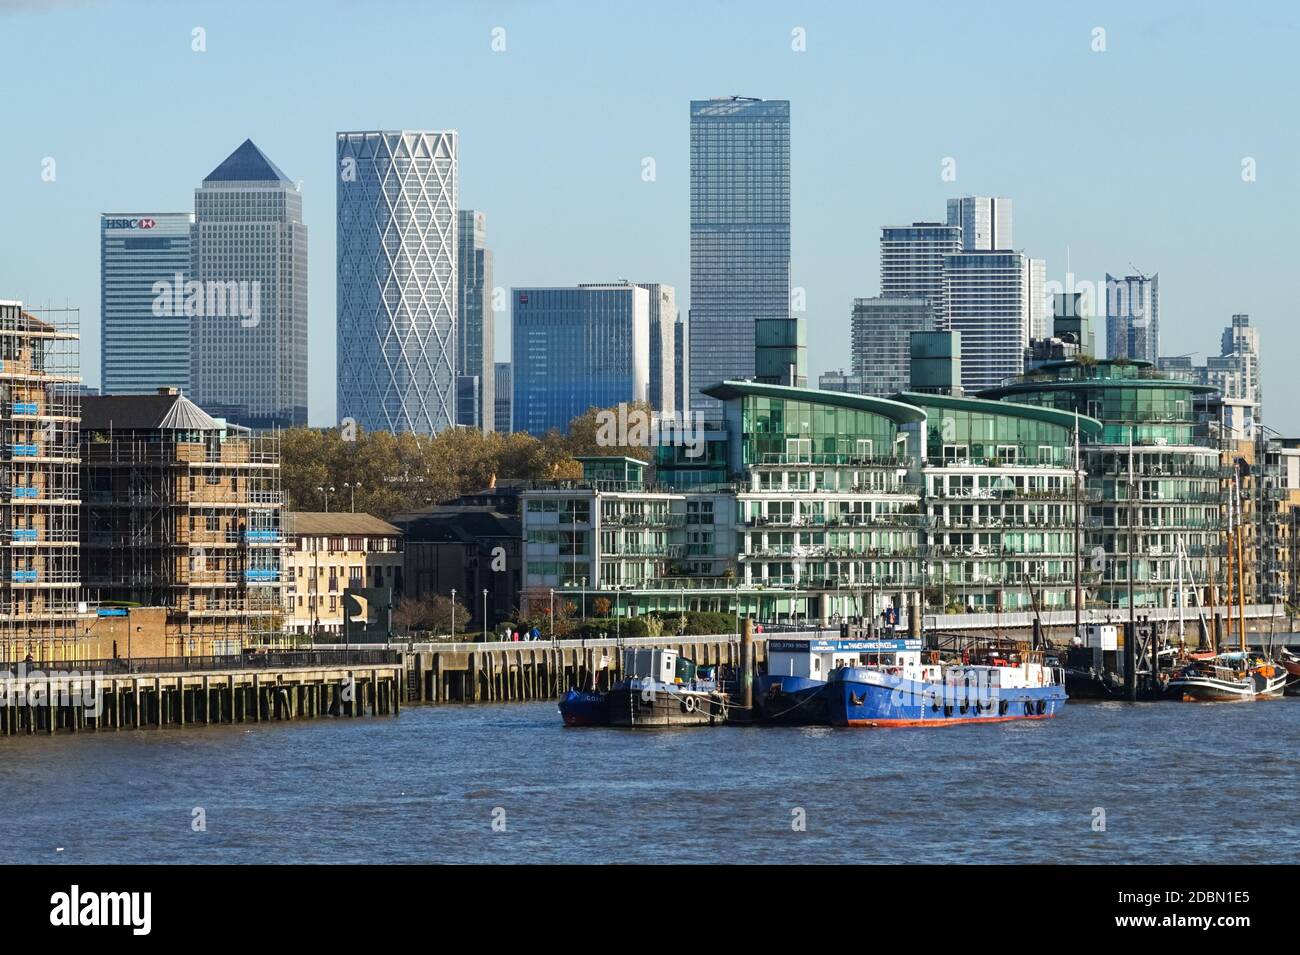 Canary Wharf skyscrapers seen behind residential buildings in London, England, United Kingdom, UK Stock Photo